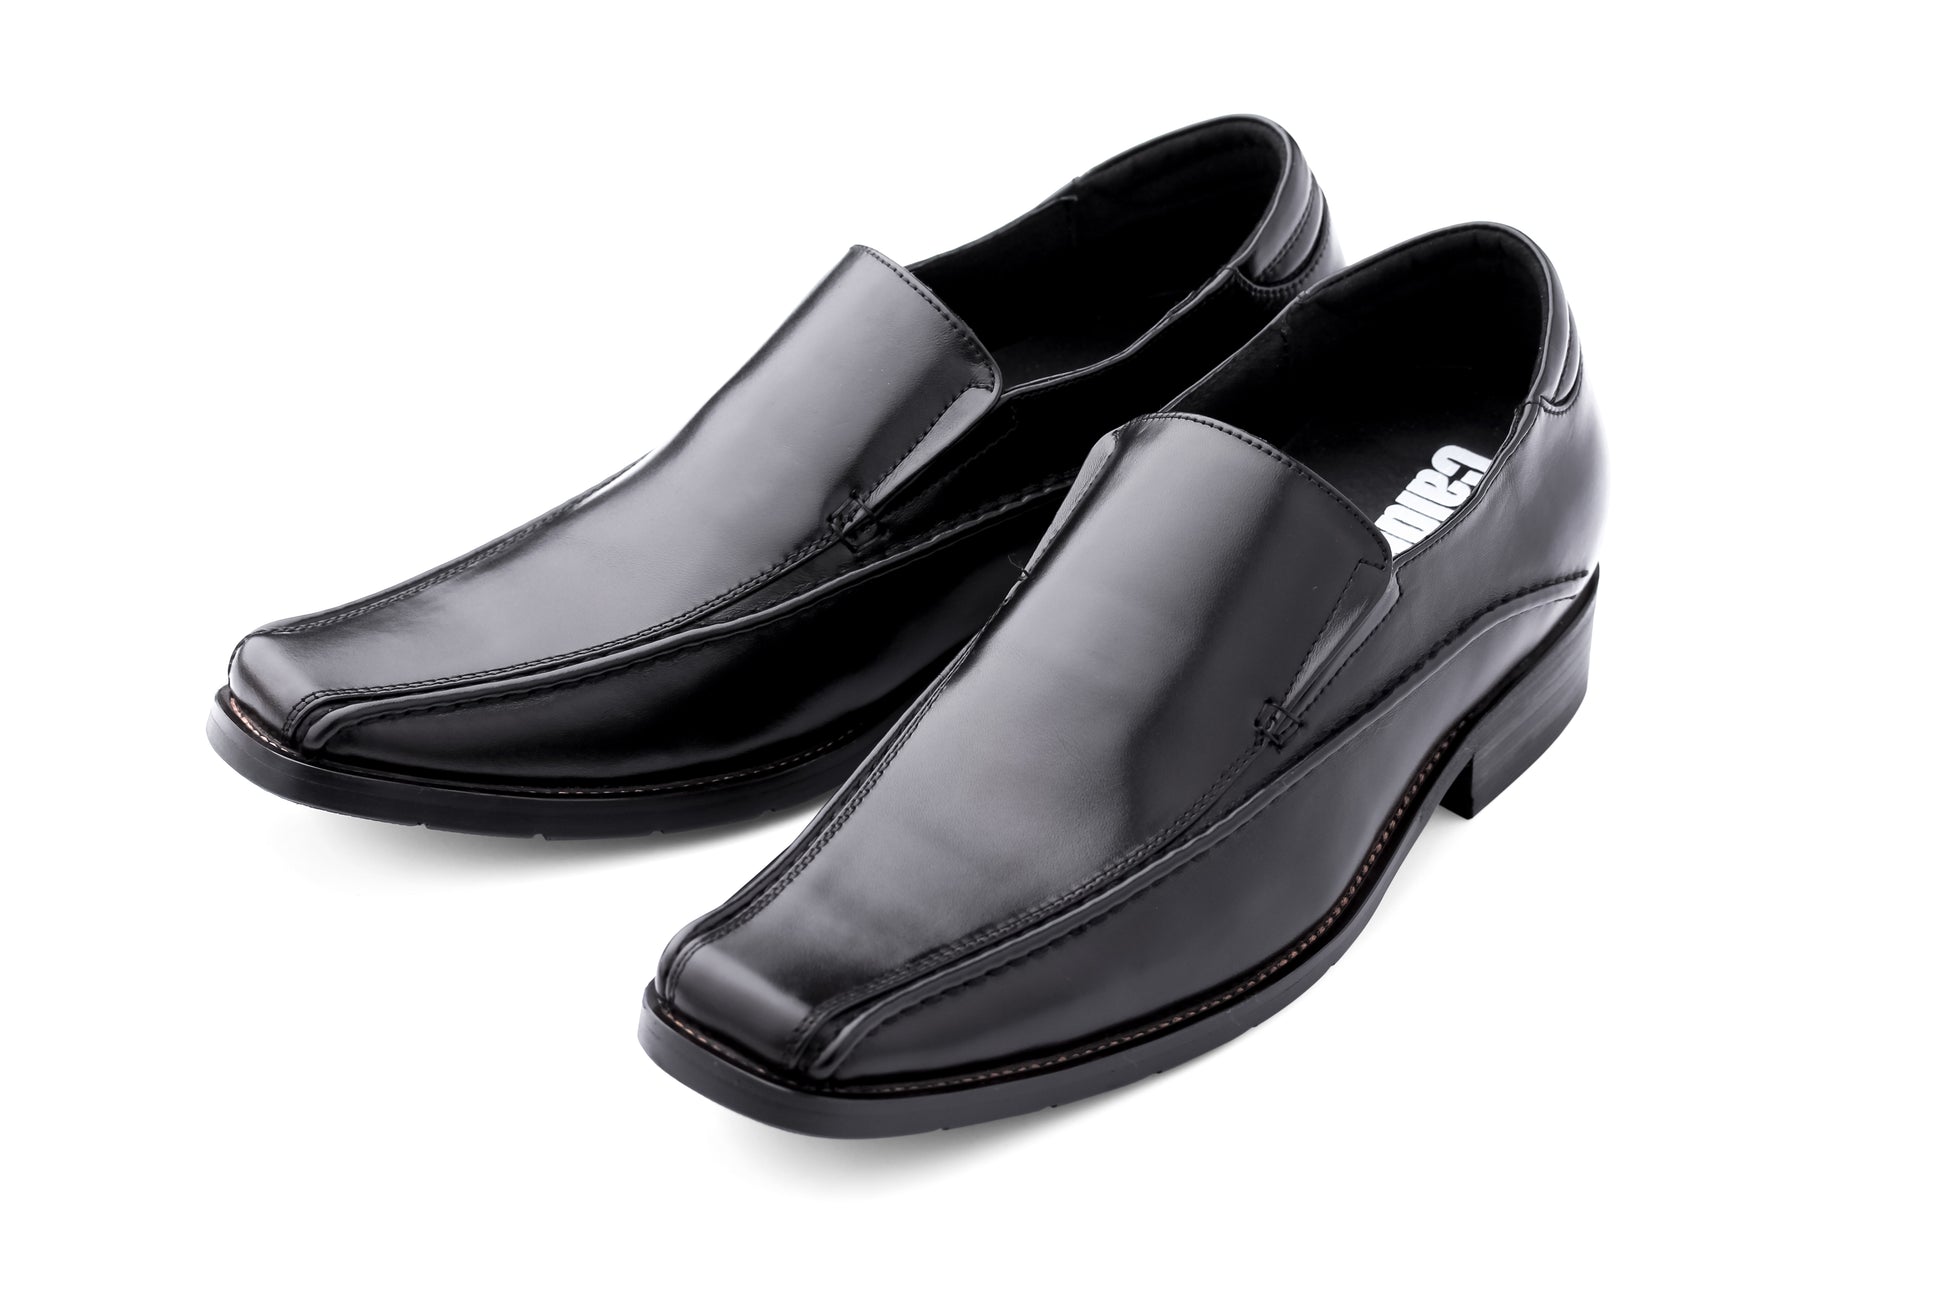 Elevator shoes height increase CALDEN 2.6" Taller Black Leather Dress Shoes MD370